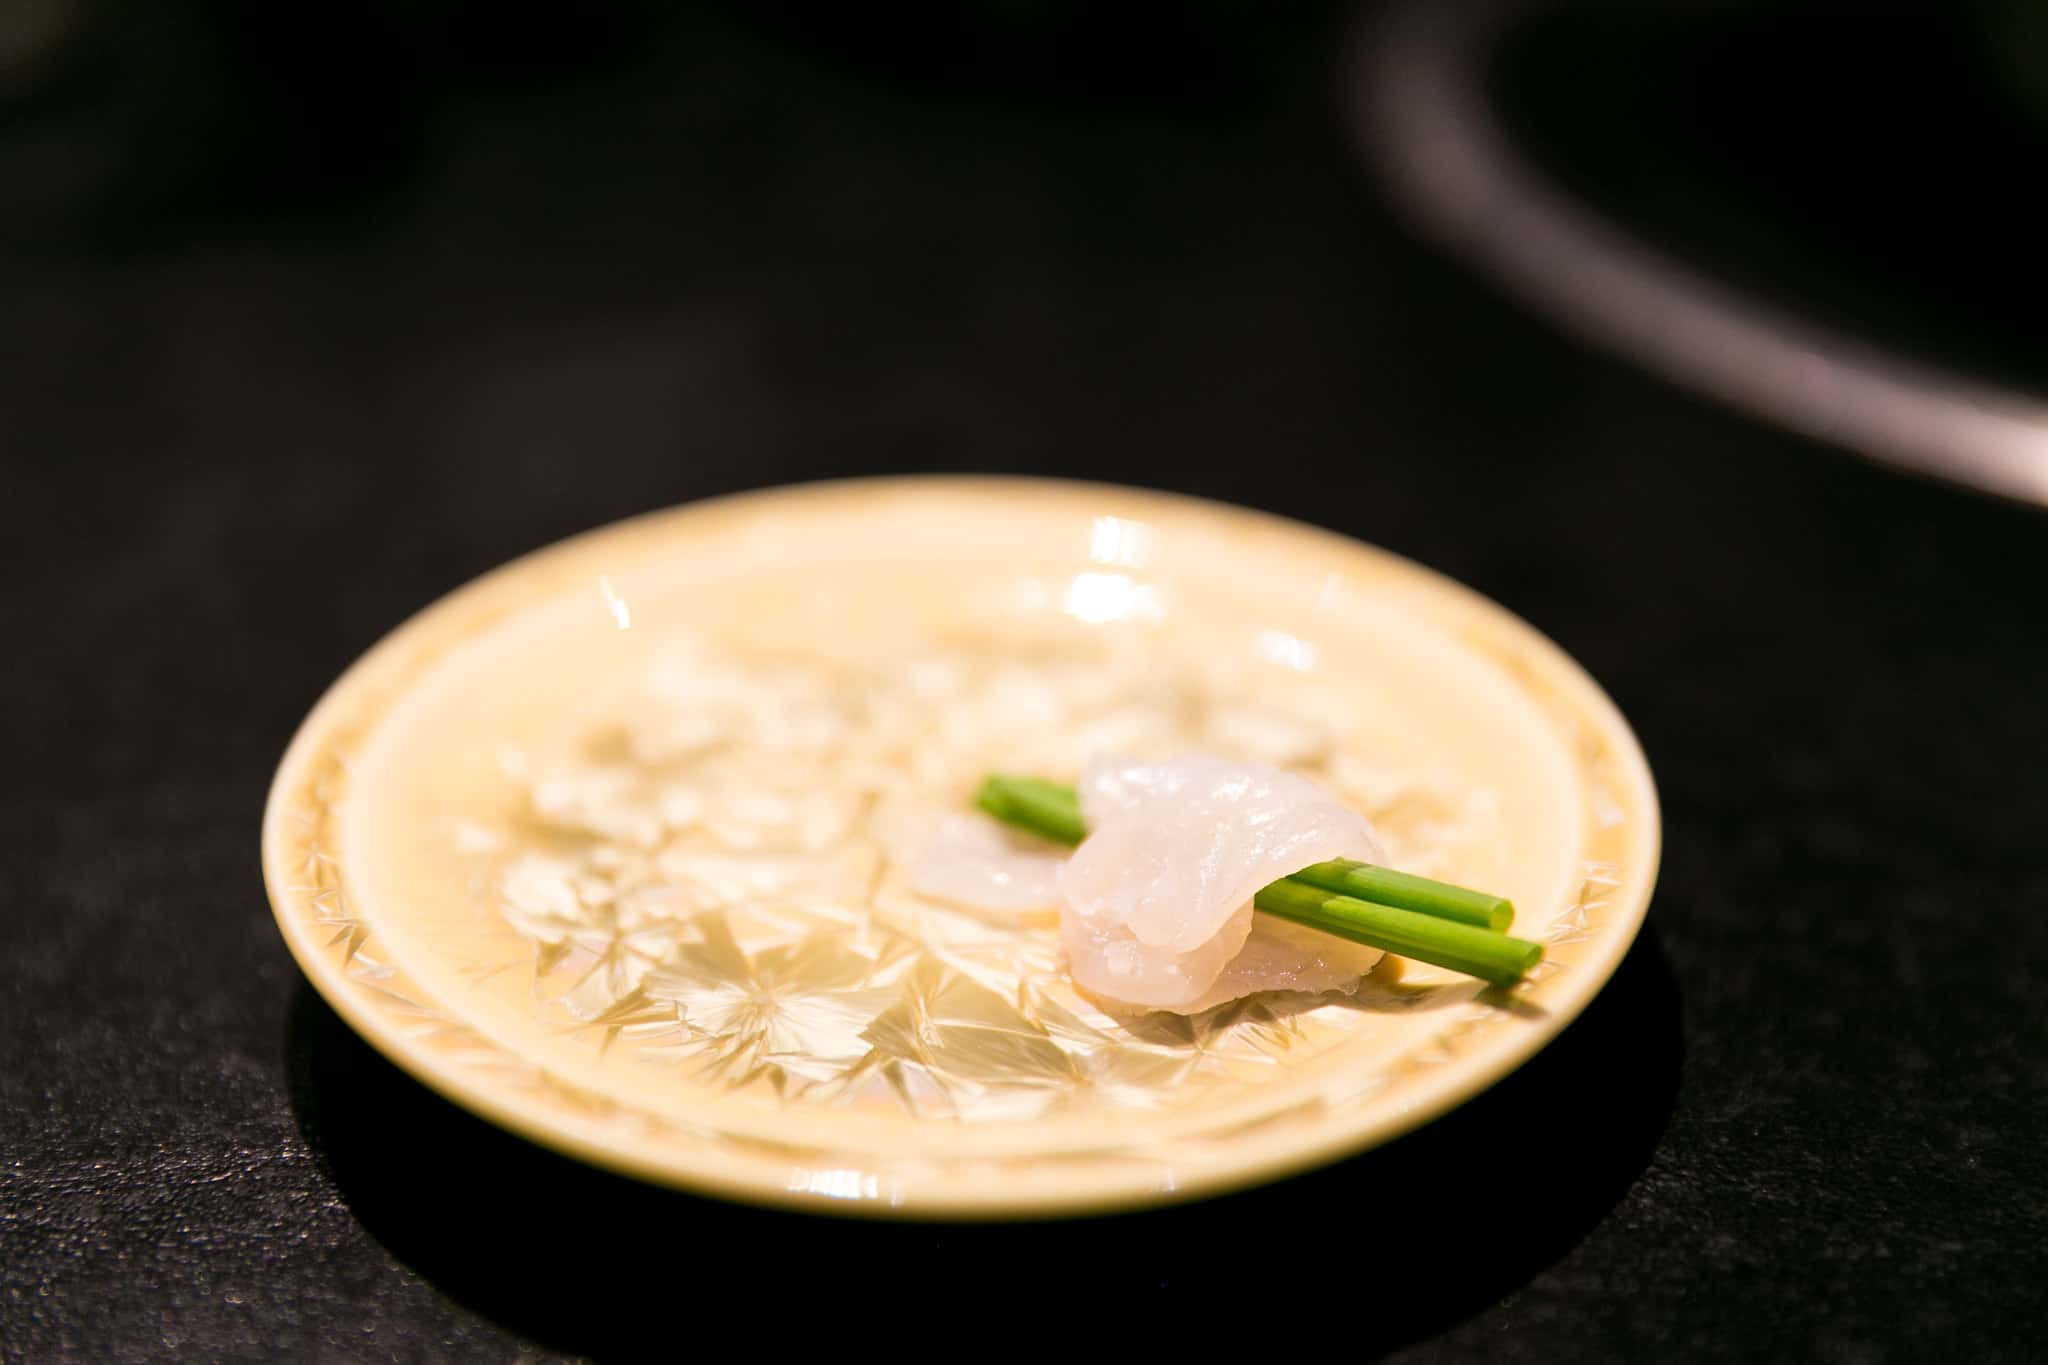 How the Japanese Prepare Fugu, A Dish Made from Poisonous Pufferfish